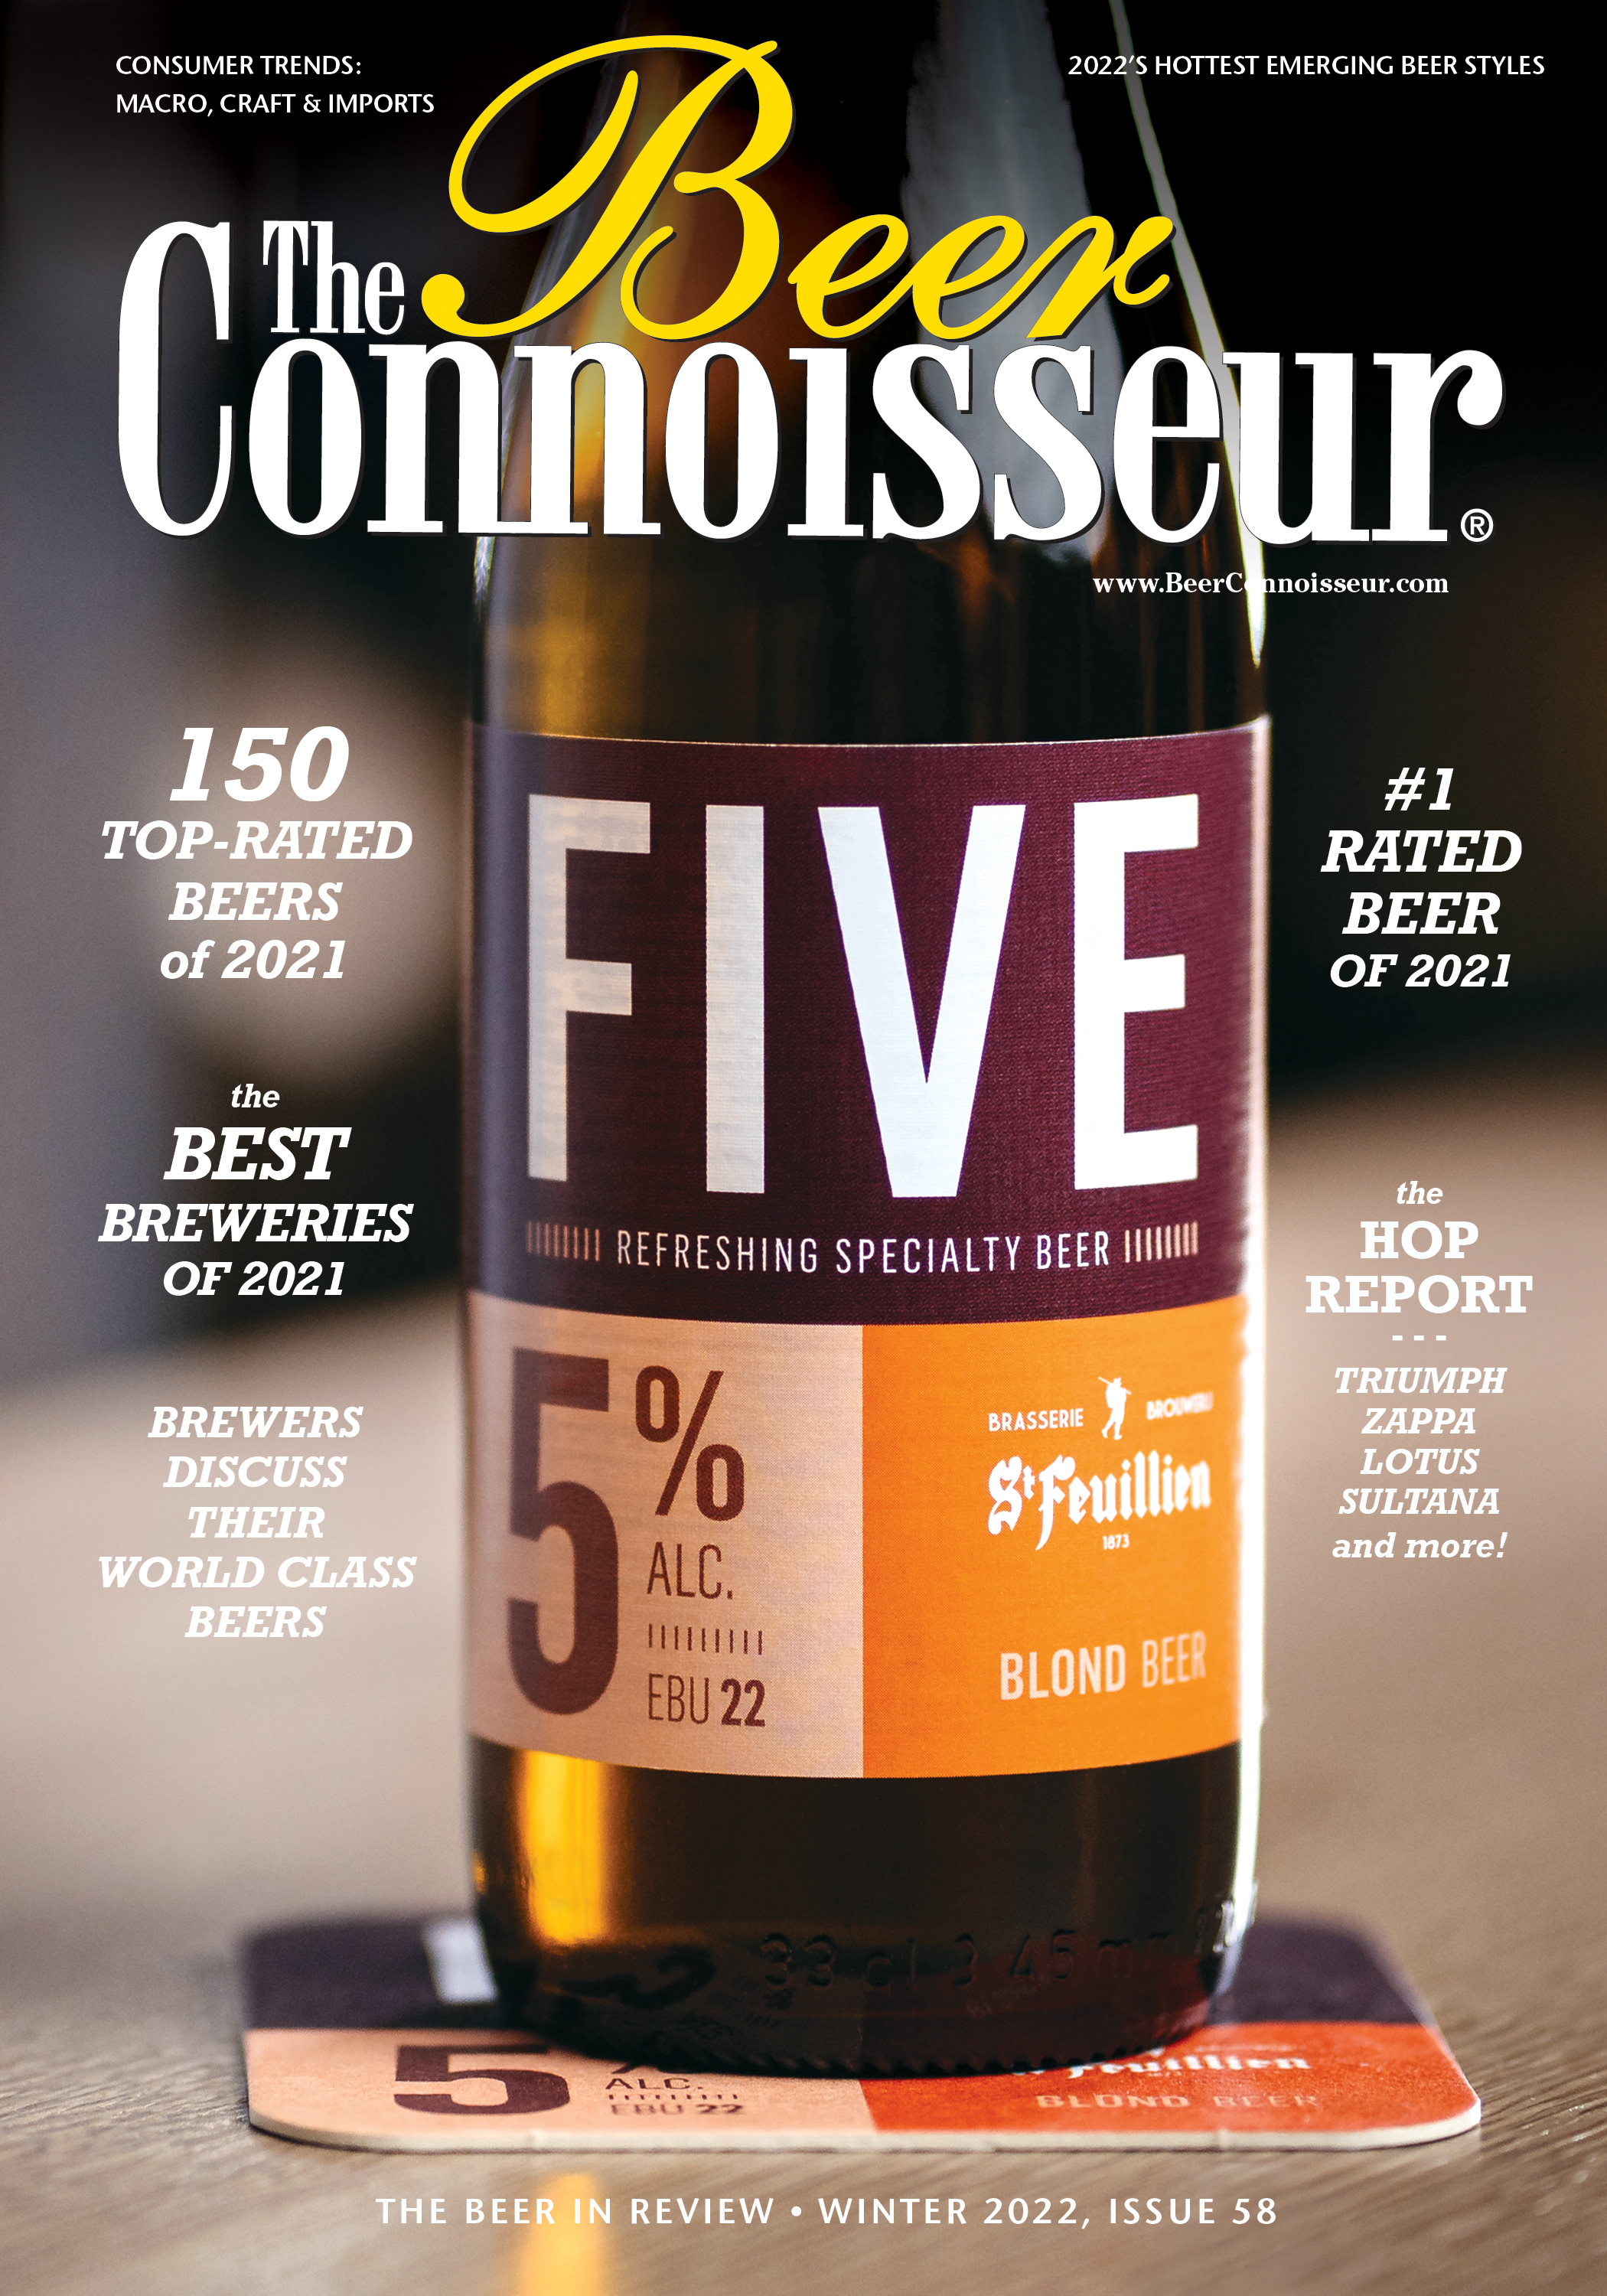 The Beer Connoisseur® magazine & online - Issue 58